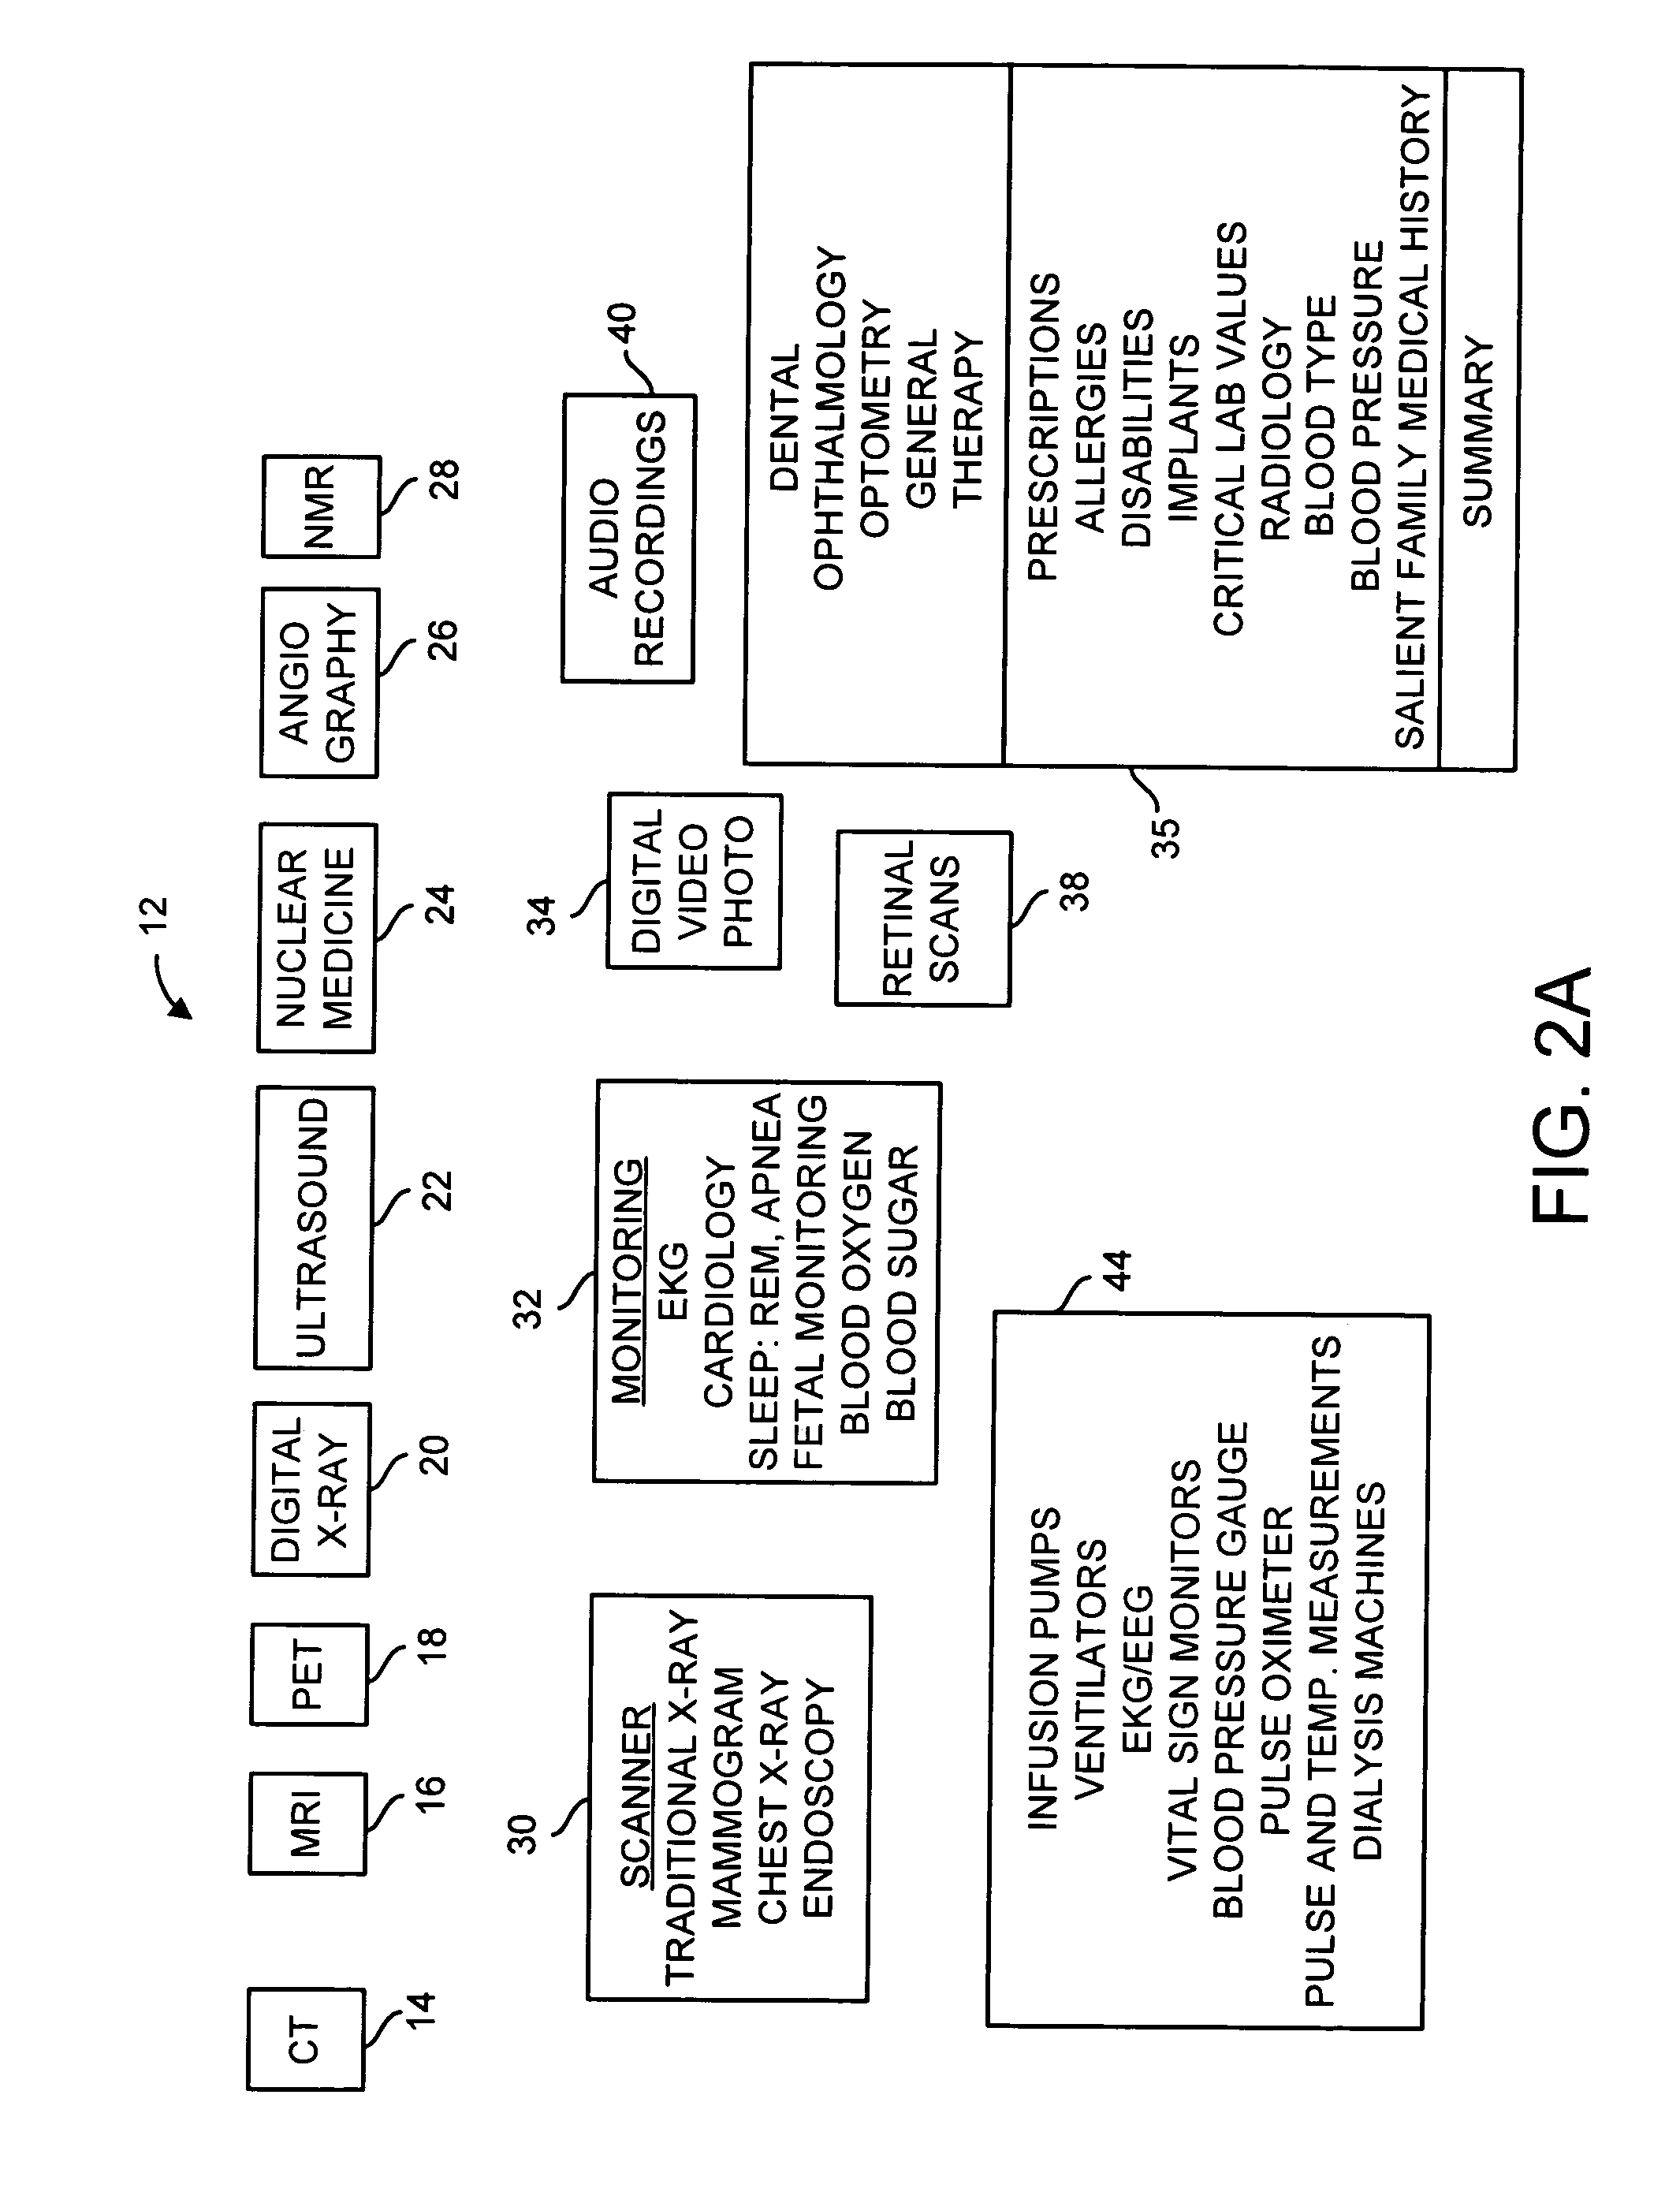 Healthcare administration communication systems and methods